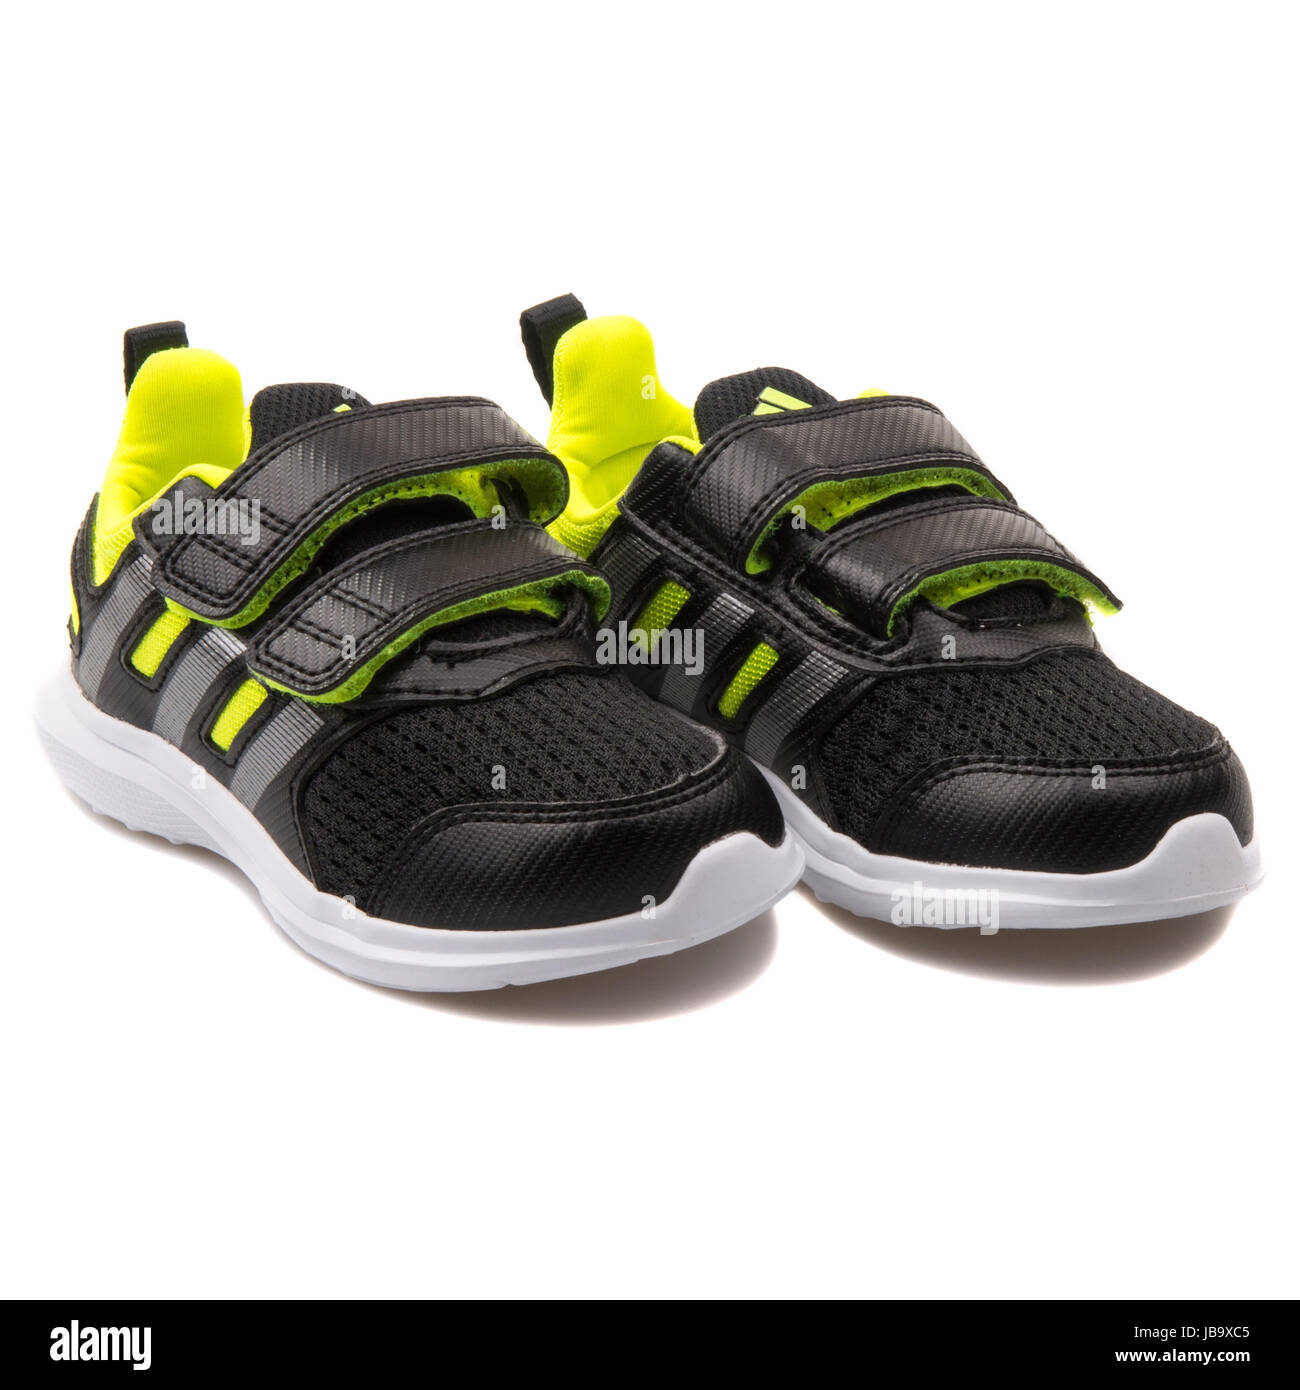 Adidas Hyperfast 2.0 CF i Black and Neon Yellow Children's Sports Shoes -  B23845 Stock Photo - Alamy